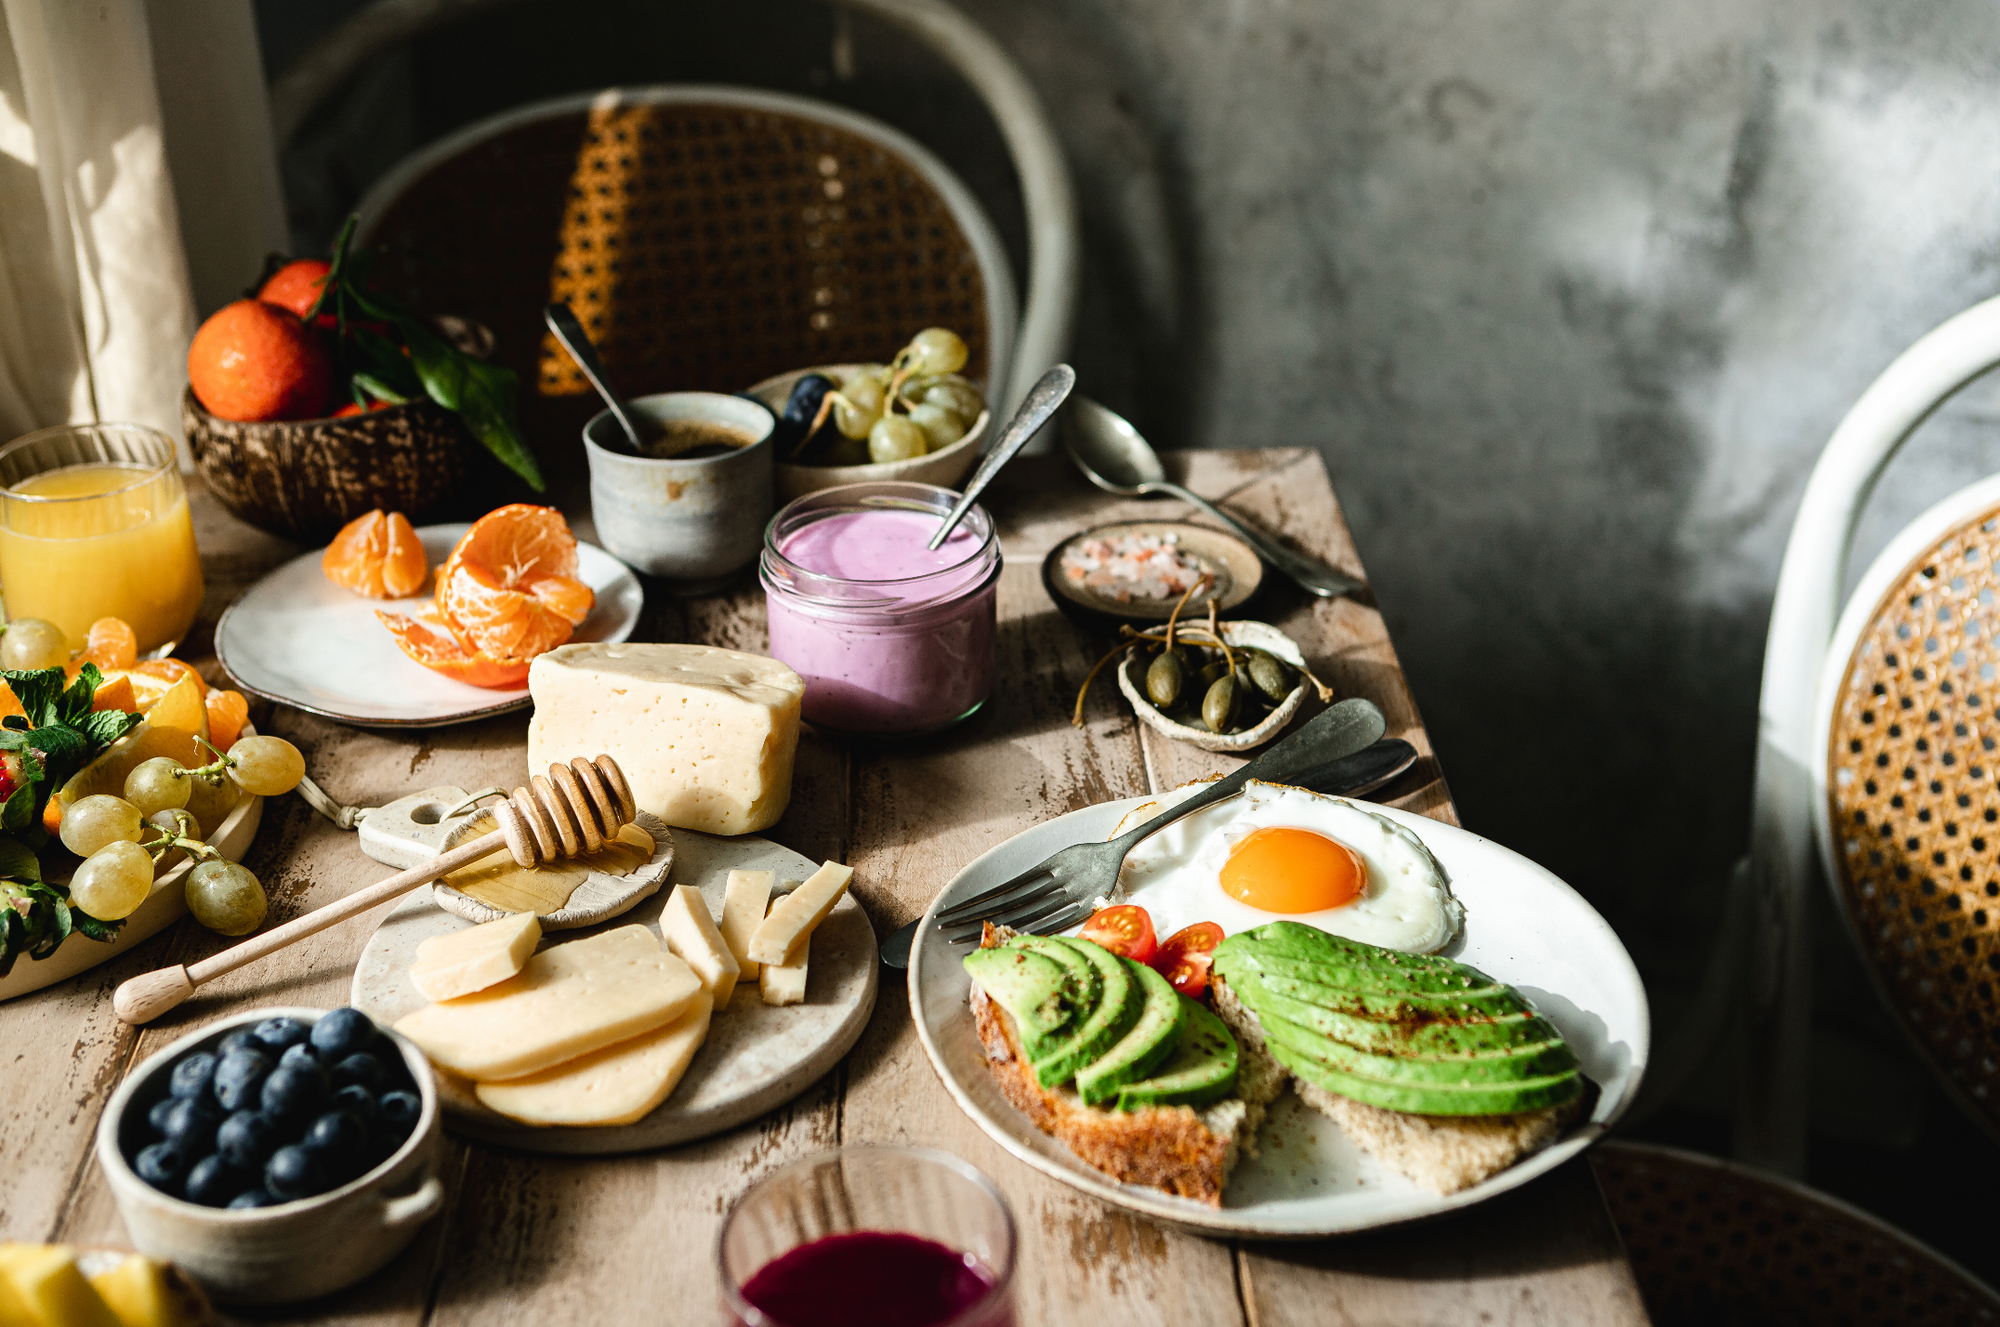 Rustic style table with breakfast foods featuring a smoothie, eggs, avocado and blueberries